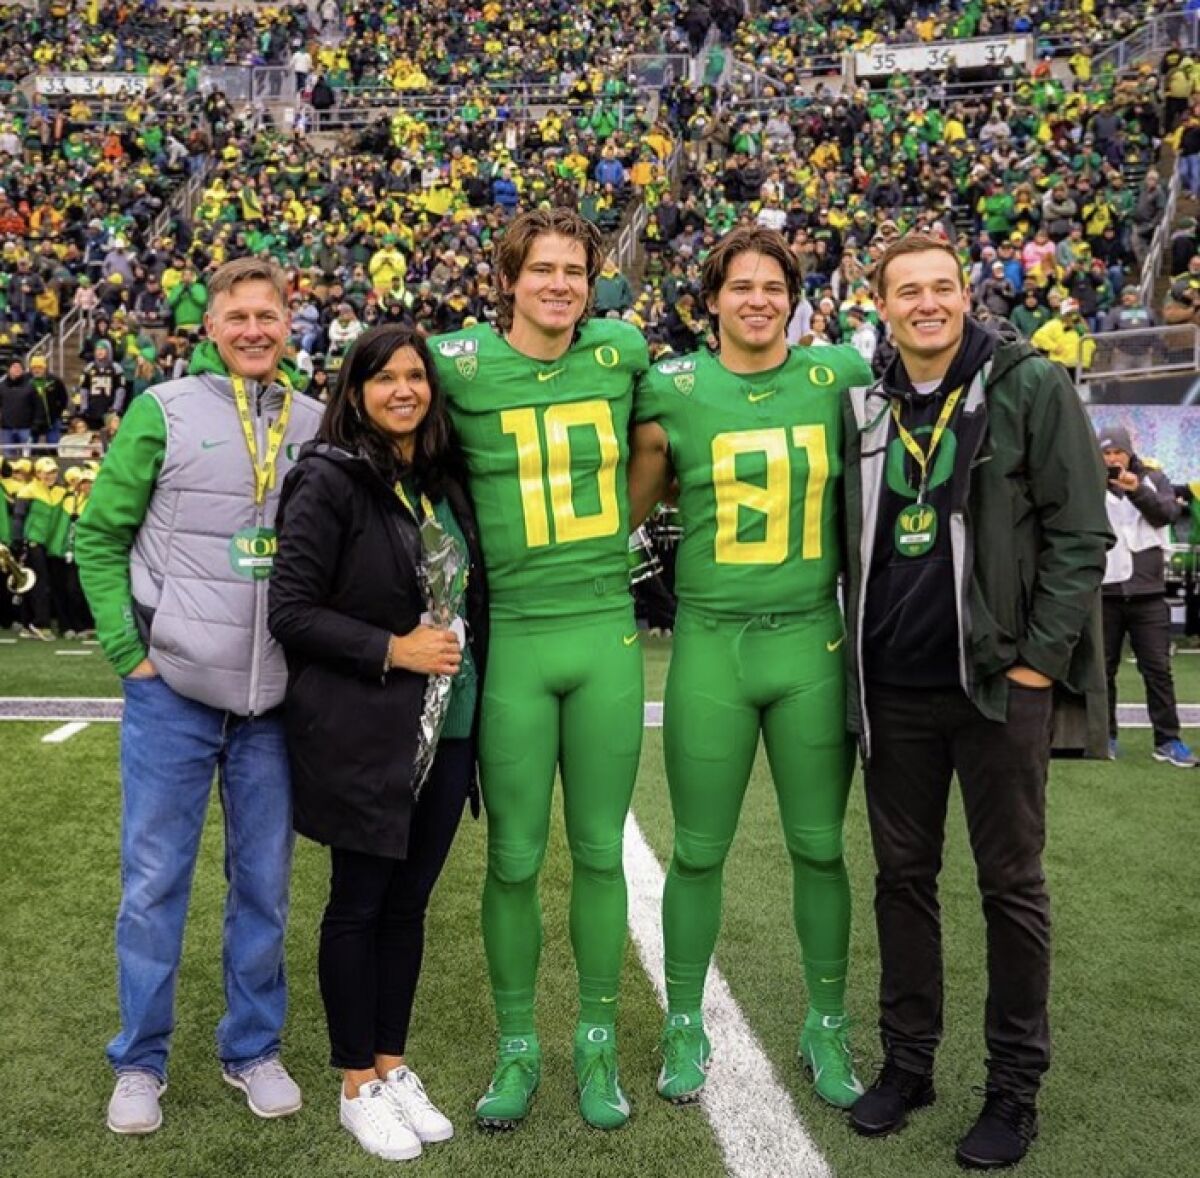 The Herbert family poses for a photo at an Oregon game. (From left to right: Mark, Holly, Justin, Patrick and Mitchell Herbert.)